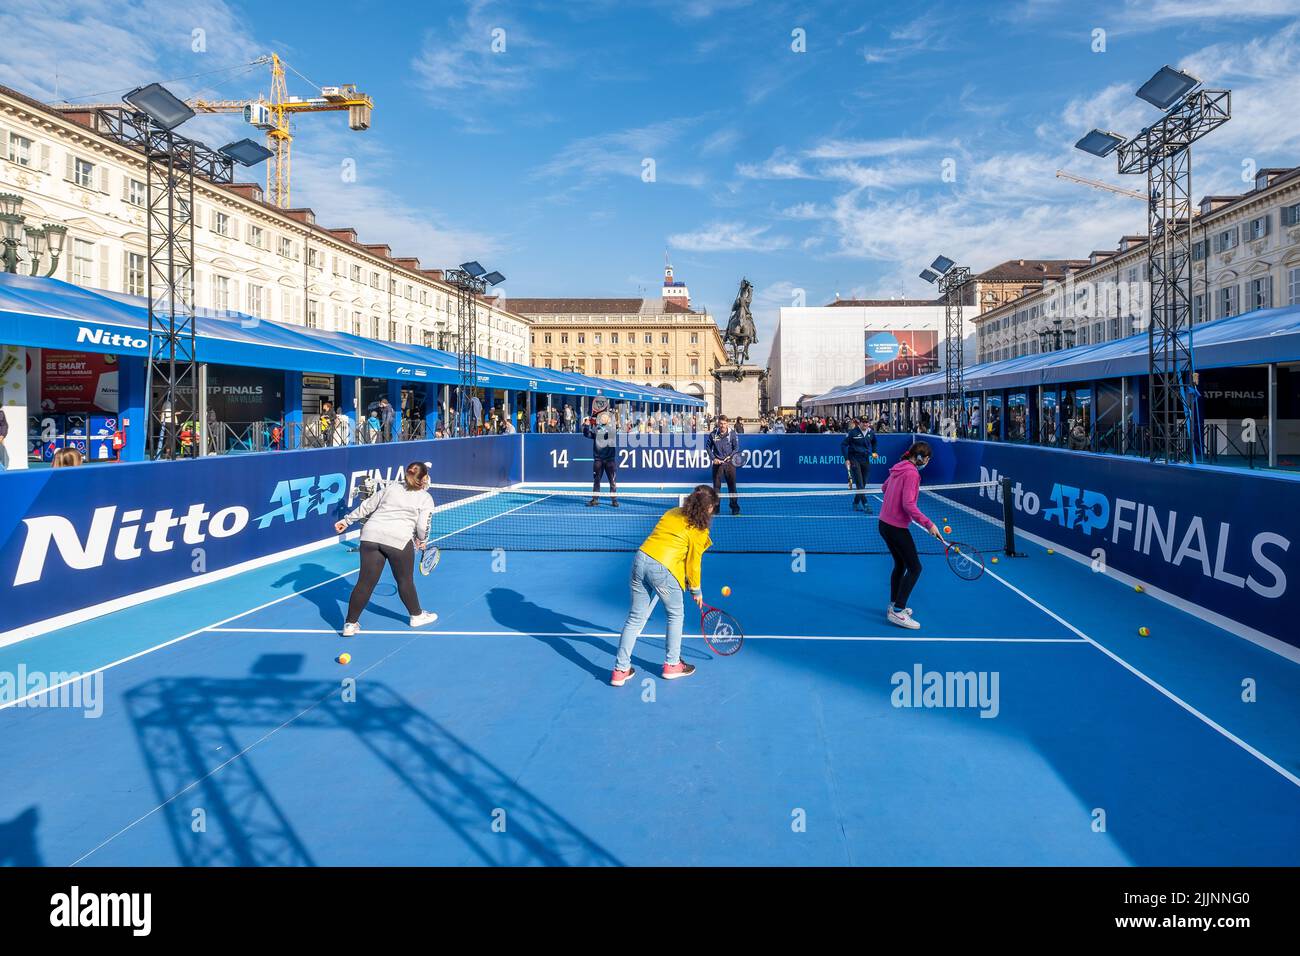 The players playing tennis during the Nitto ATP Finals in Italy Stock Photo